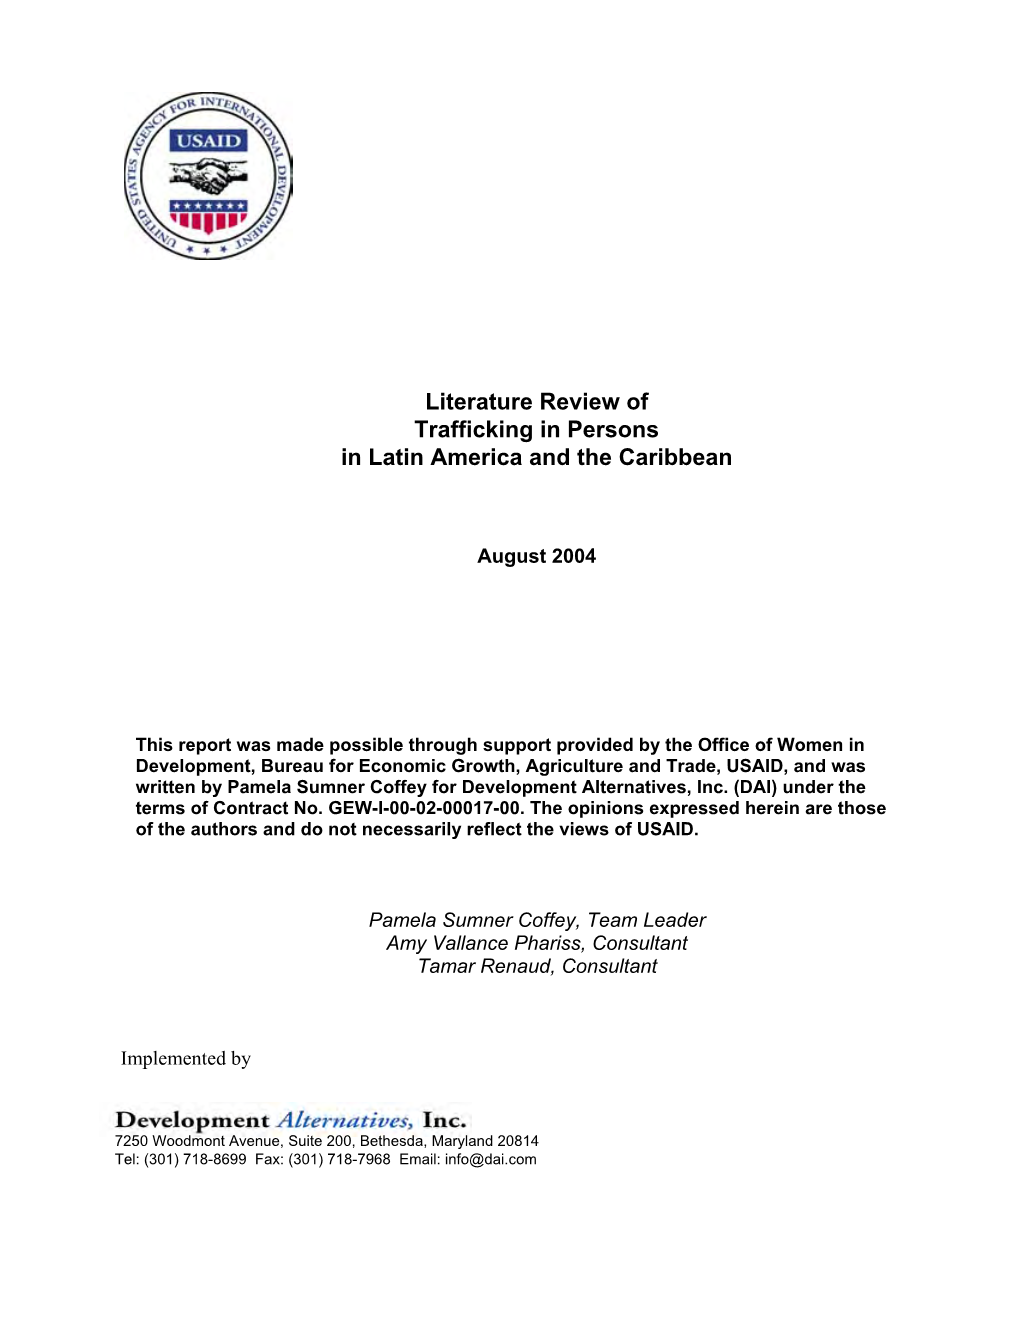 Literature Review of Trafficking in Persons in Latin America and the Caribbean